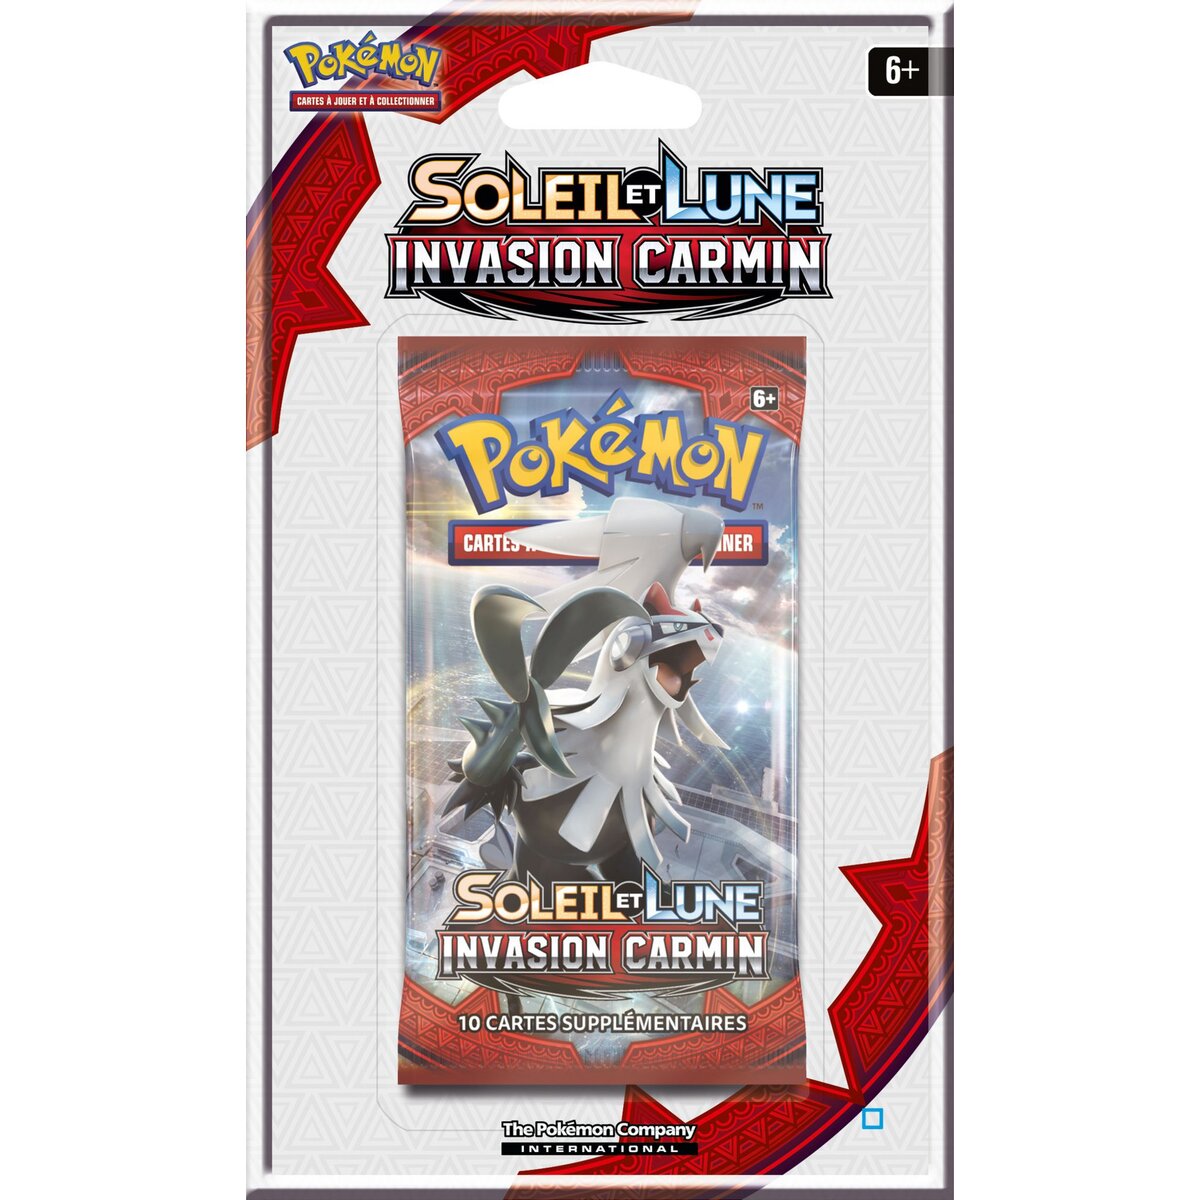 ASMODEE Pokémon - Booster Blister Soleil & Lune 4